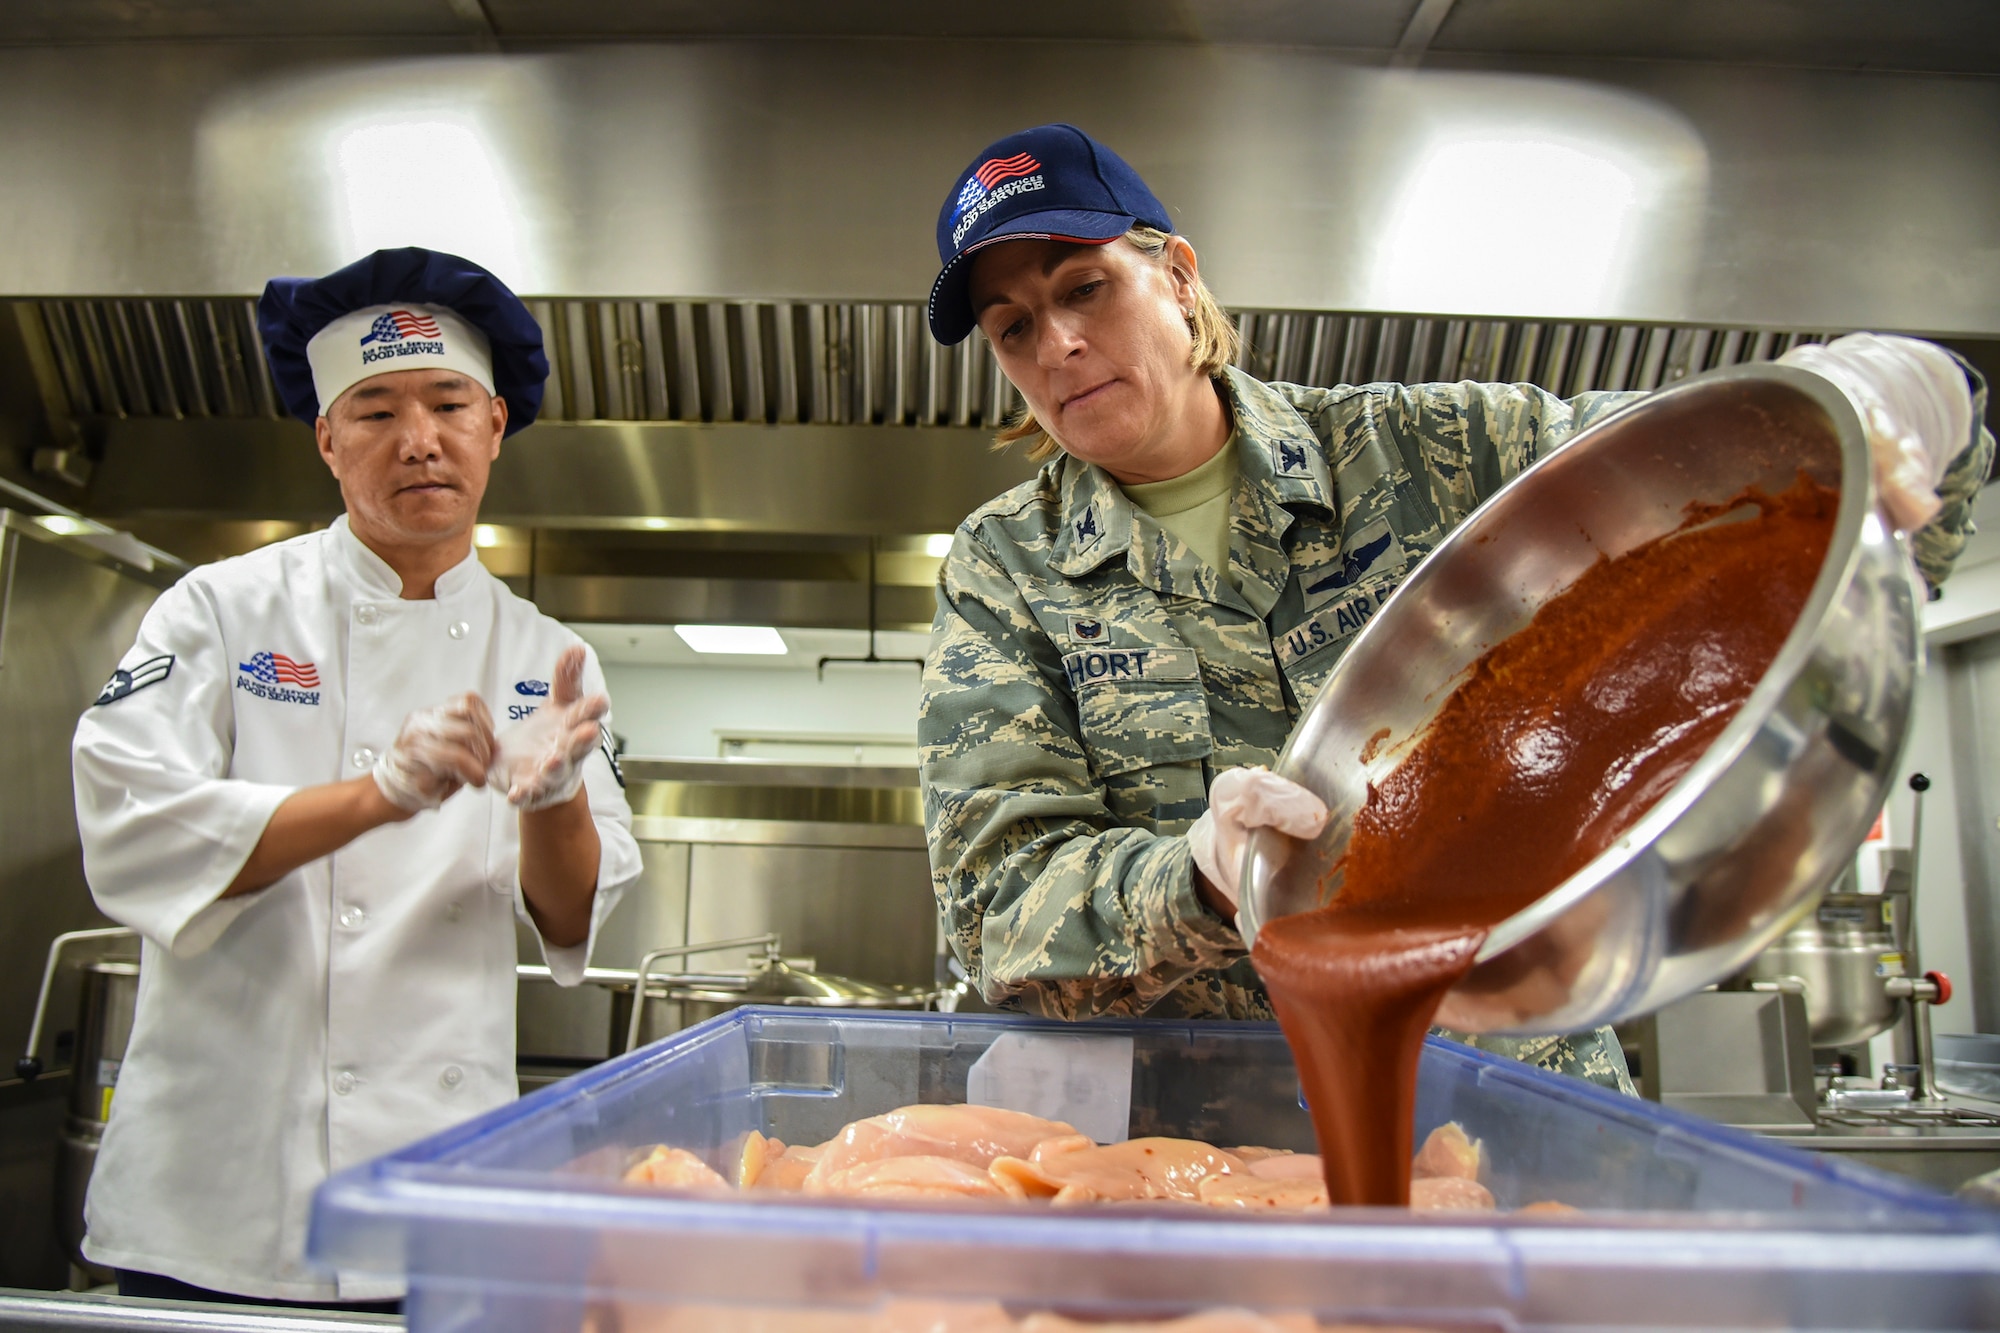 Col. Jennifer Short, right, 23d Wing (WG) commander, pours sauce onto chicken during an immersion tour, June 11, 2018, at Moody Air Force Base, Ga. Short and Chief Master Sgt James Allen, 23d WG command chief  toured the Georgia Pines Dining Facility and the Information Learning Center to gain a better understanding of their overall mission, capabilities and comprehensive duties. (U.S. Air Force photo by Airman 1st Class Eugene Oliver)